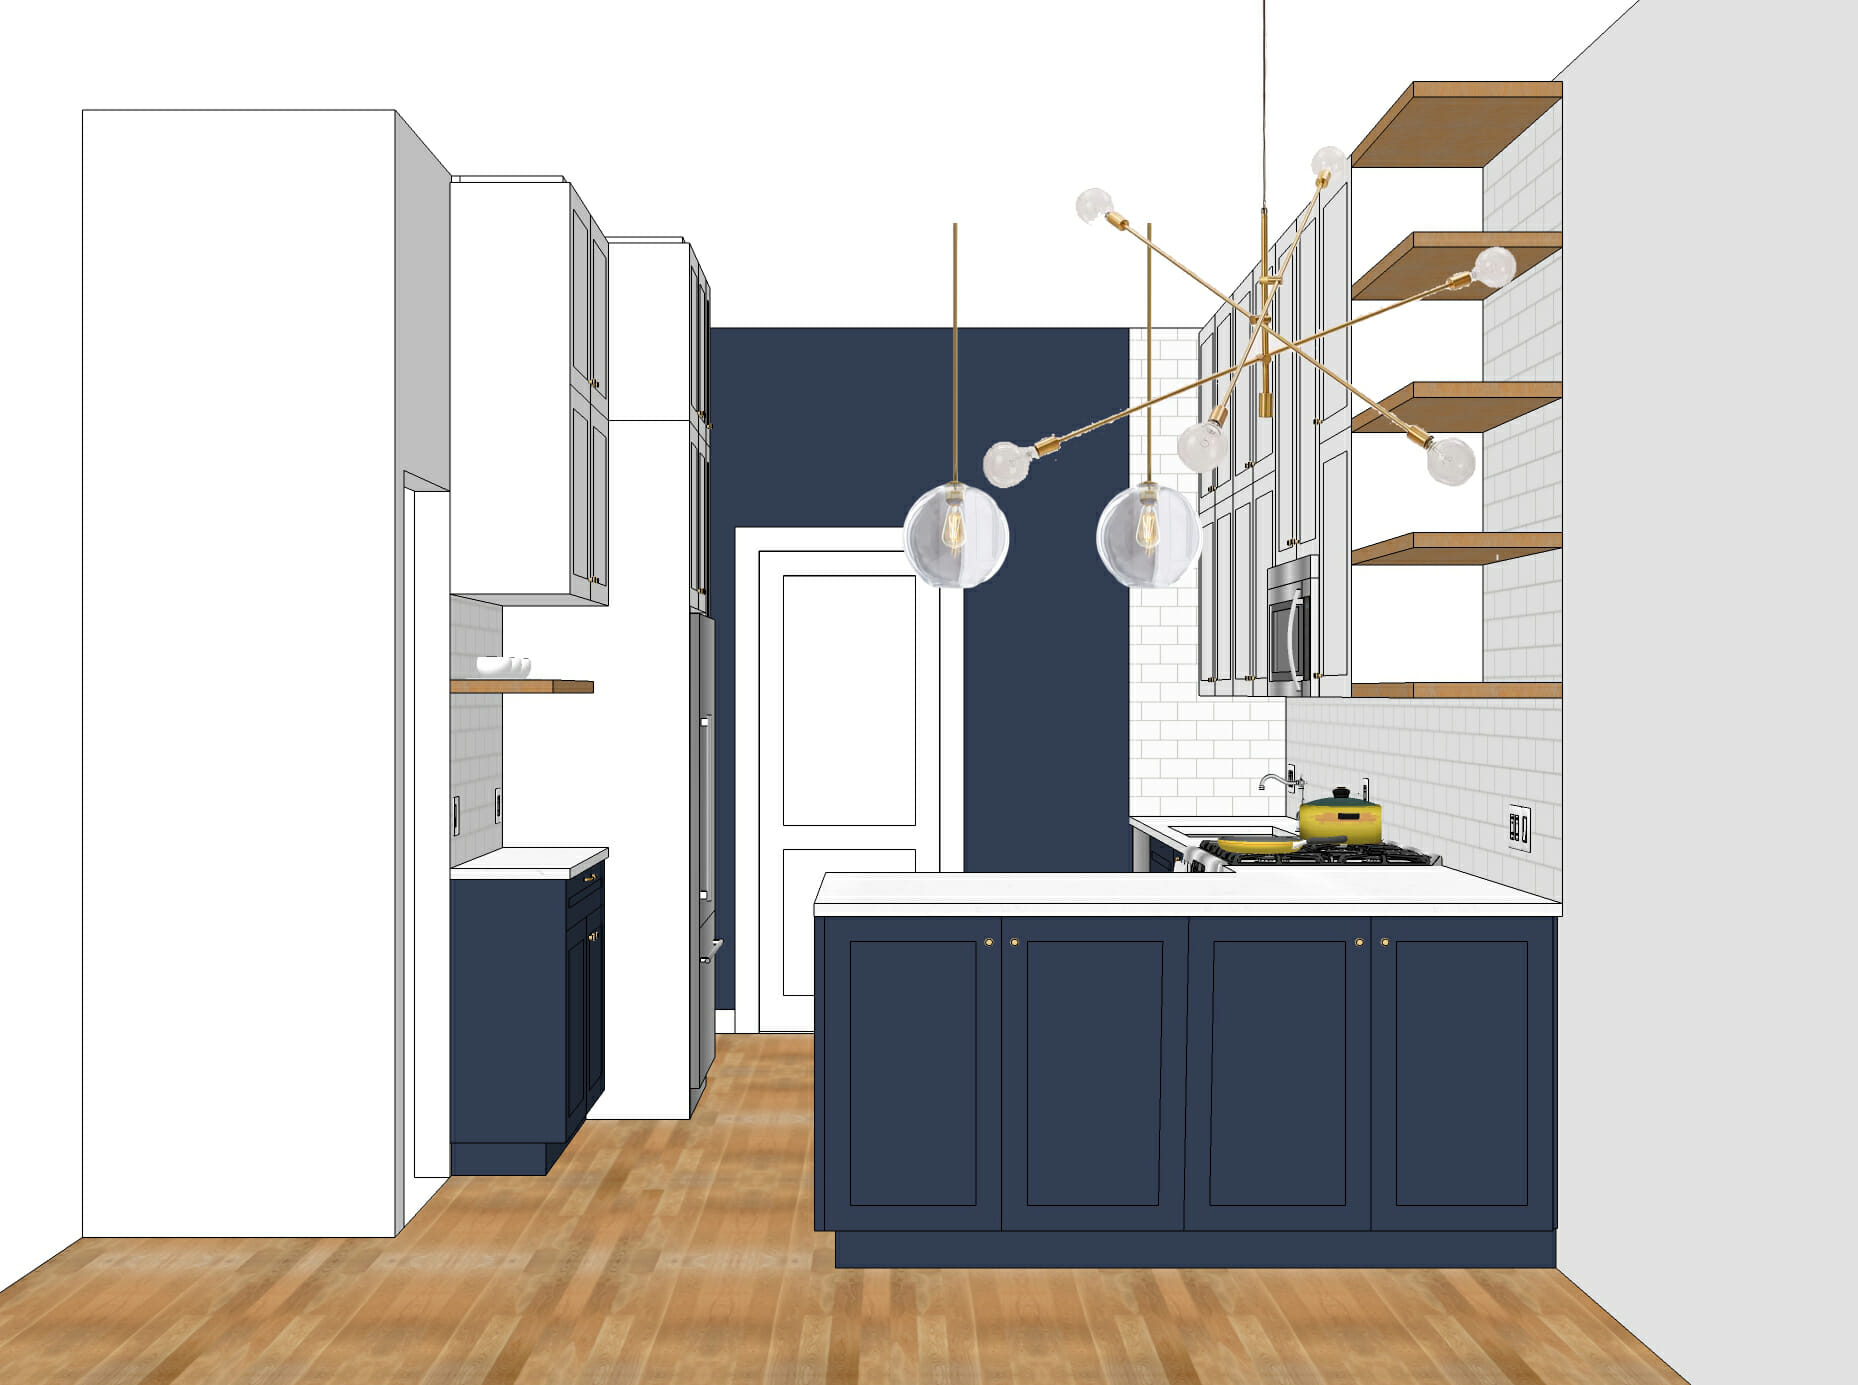 graphic rendering of kitchen with white overhead cabinets and navy blue under counter cabinets and floating wooden shelves and hardwood floors and contemporary chandelier in dining before renovation